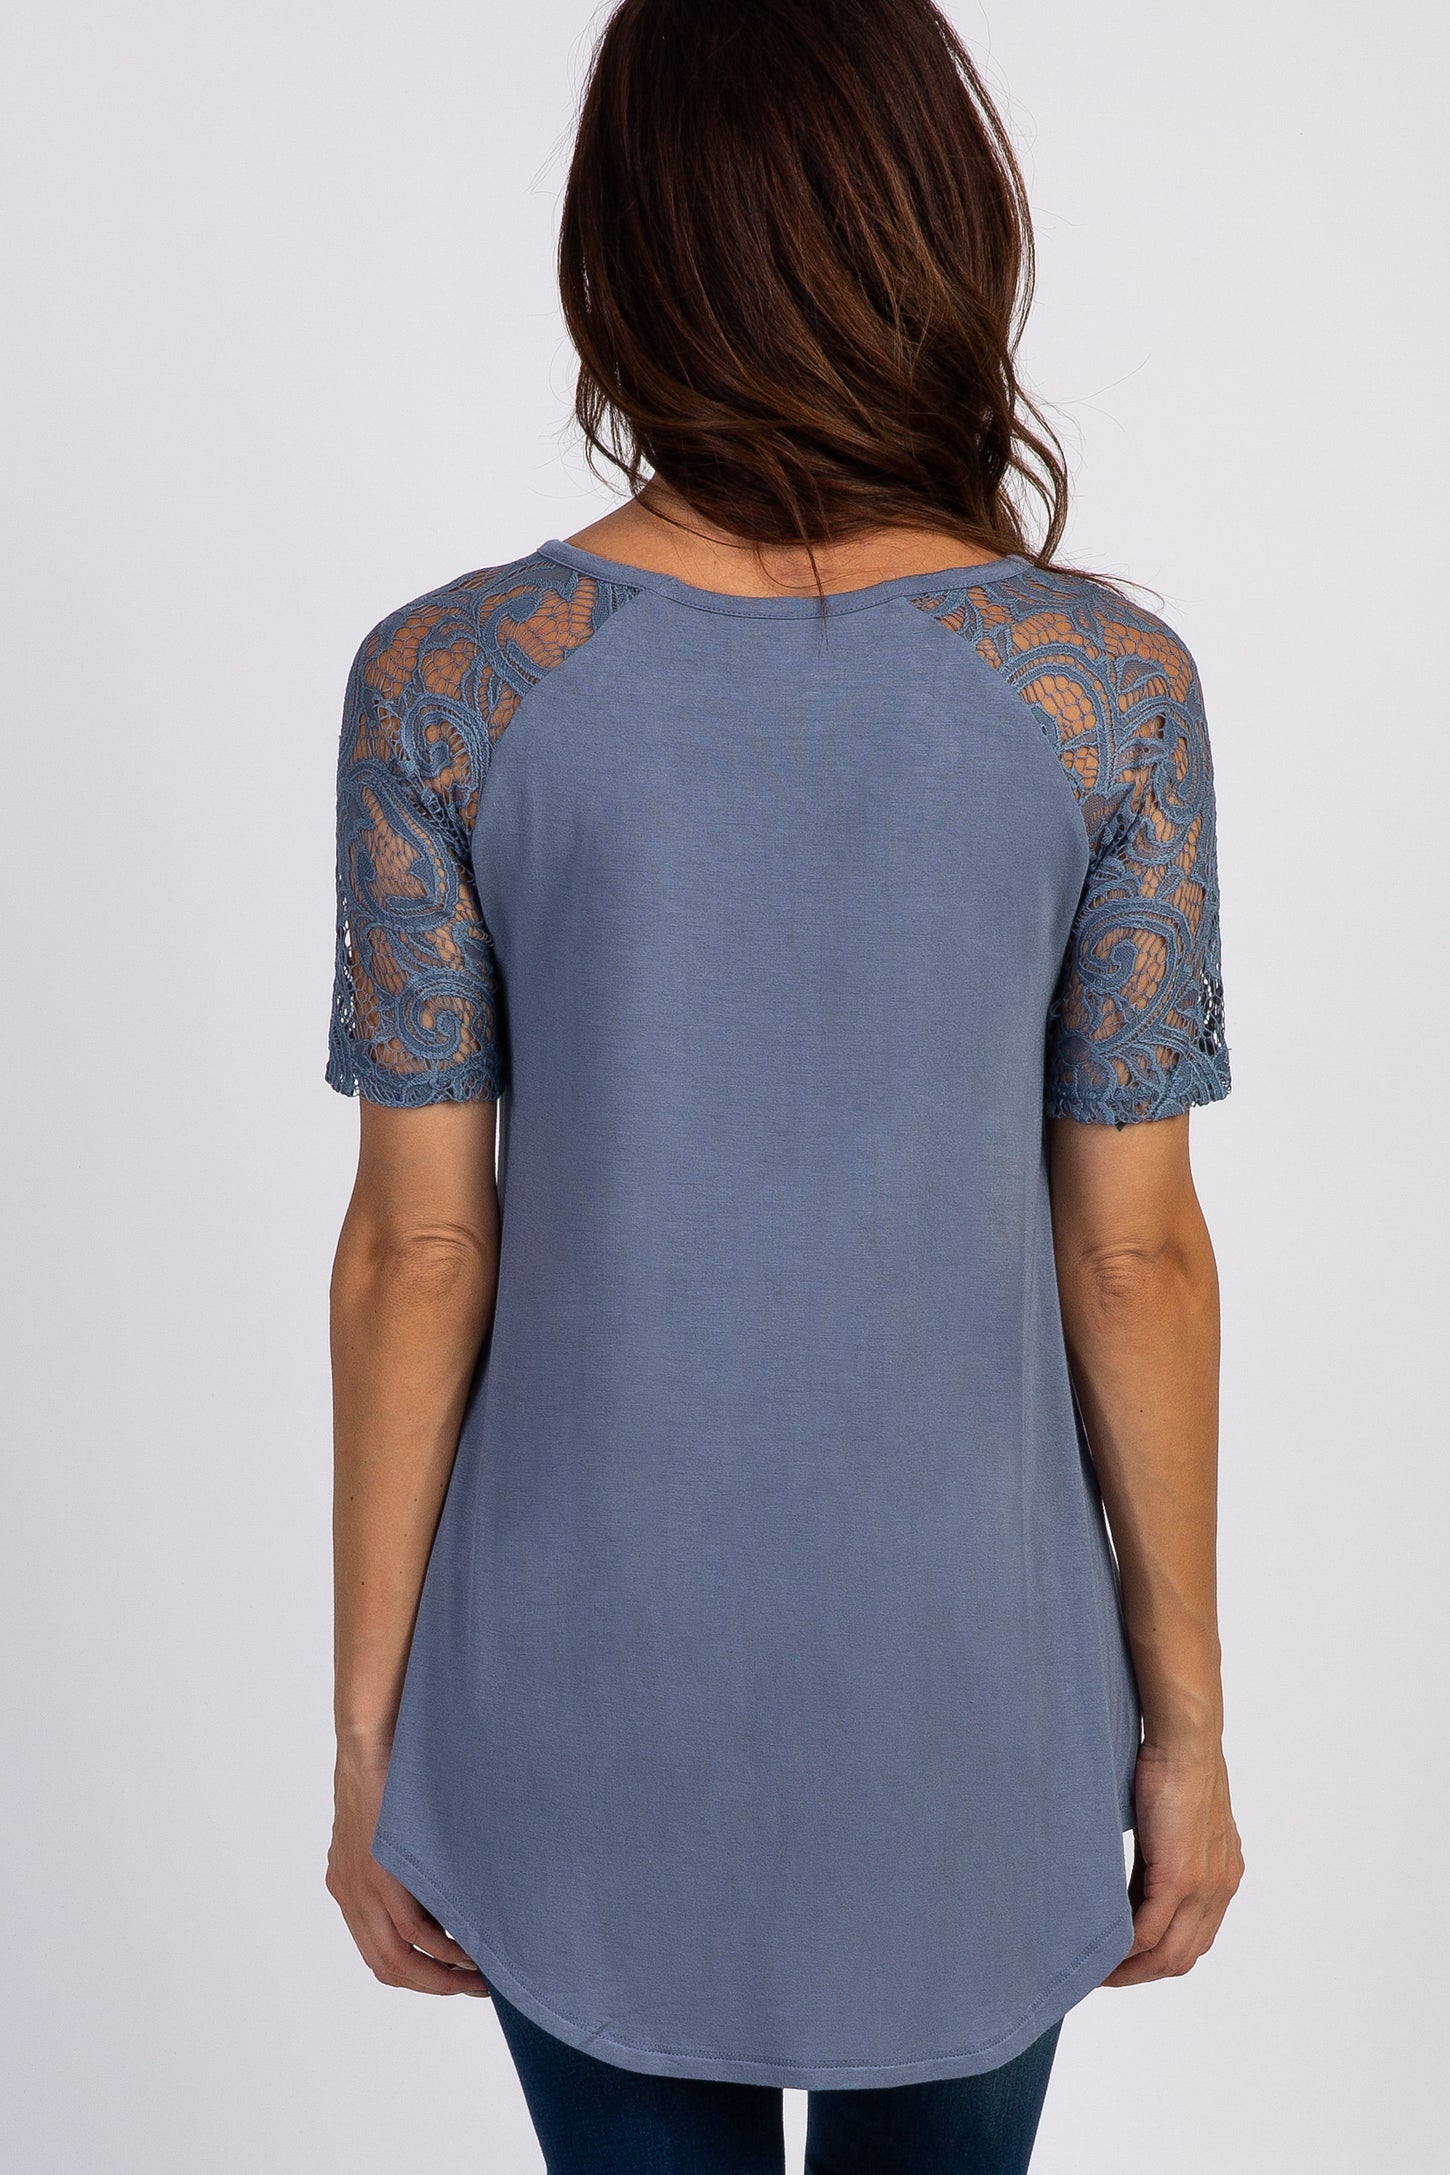 Blue Lace Sleeve Top